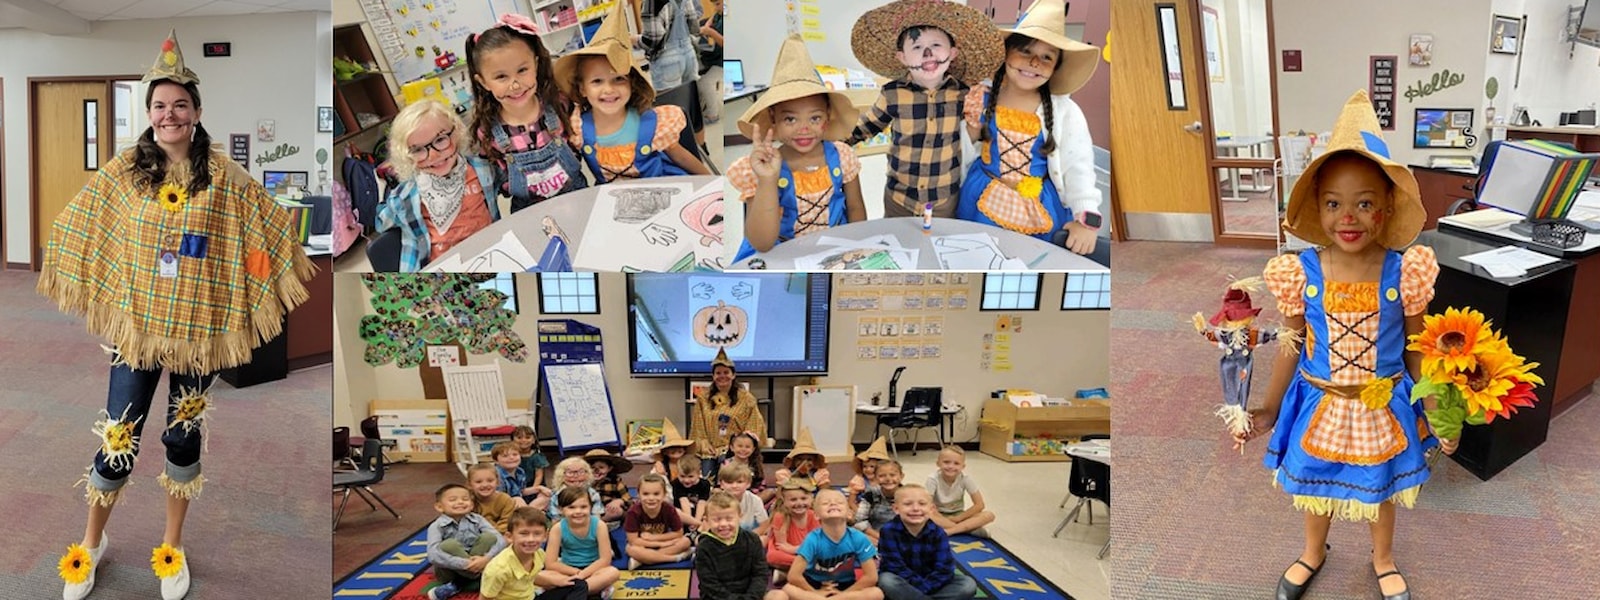 several pictures of students and teacher dressed as scarecrows